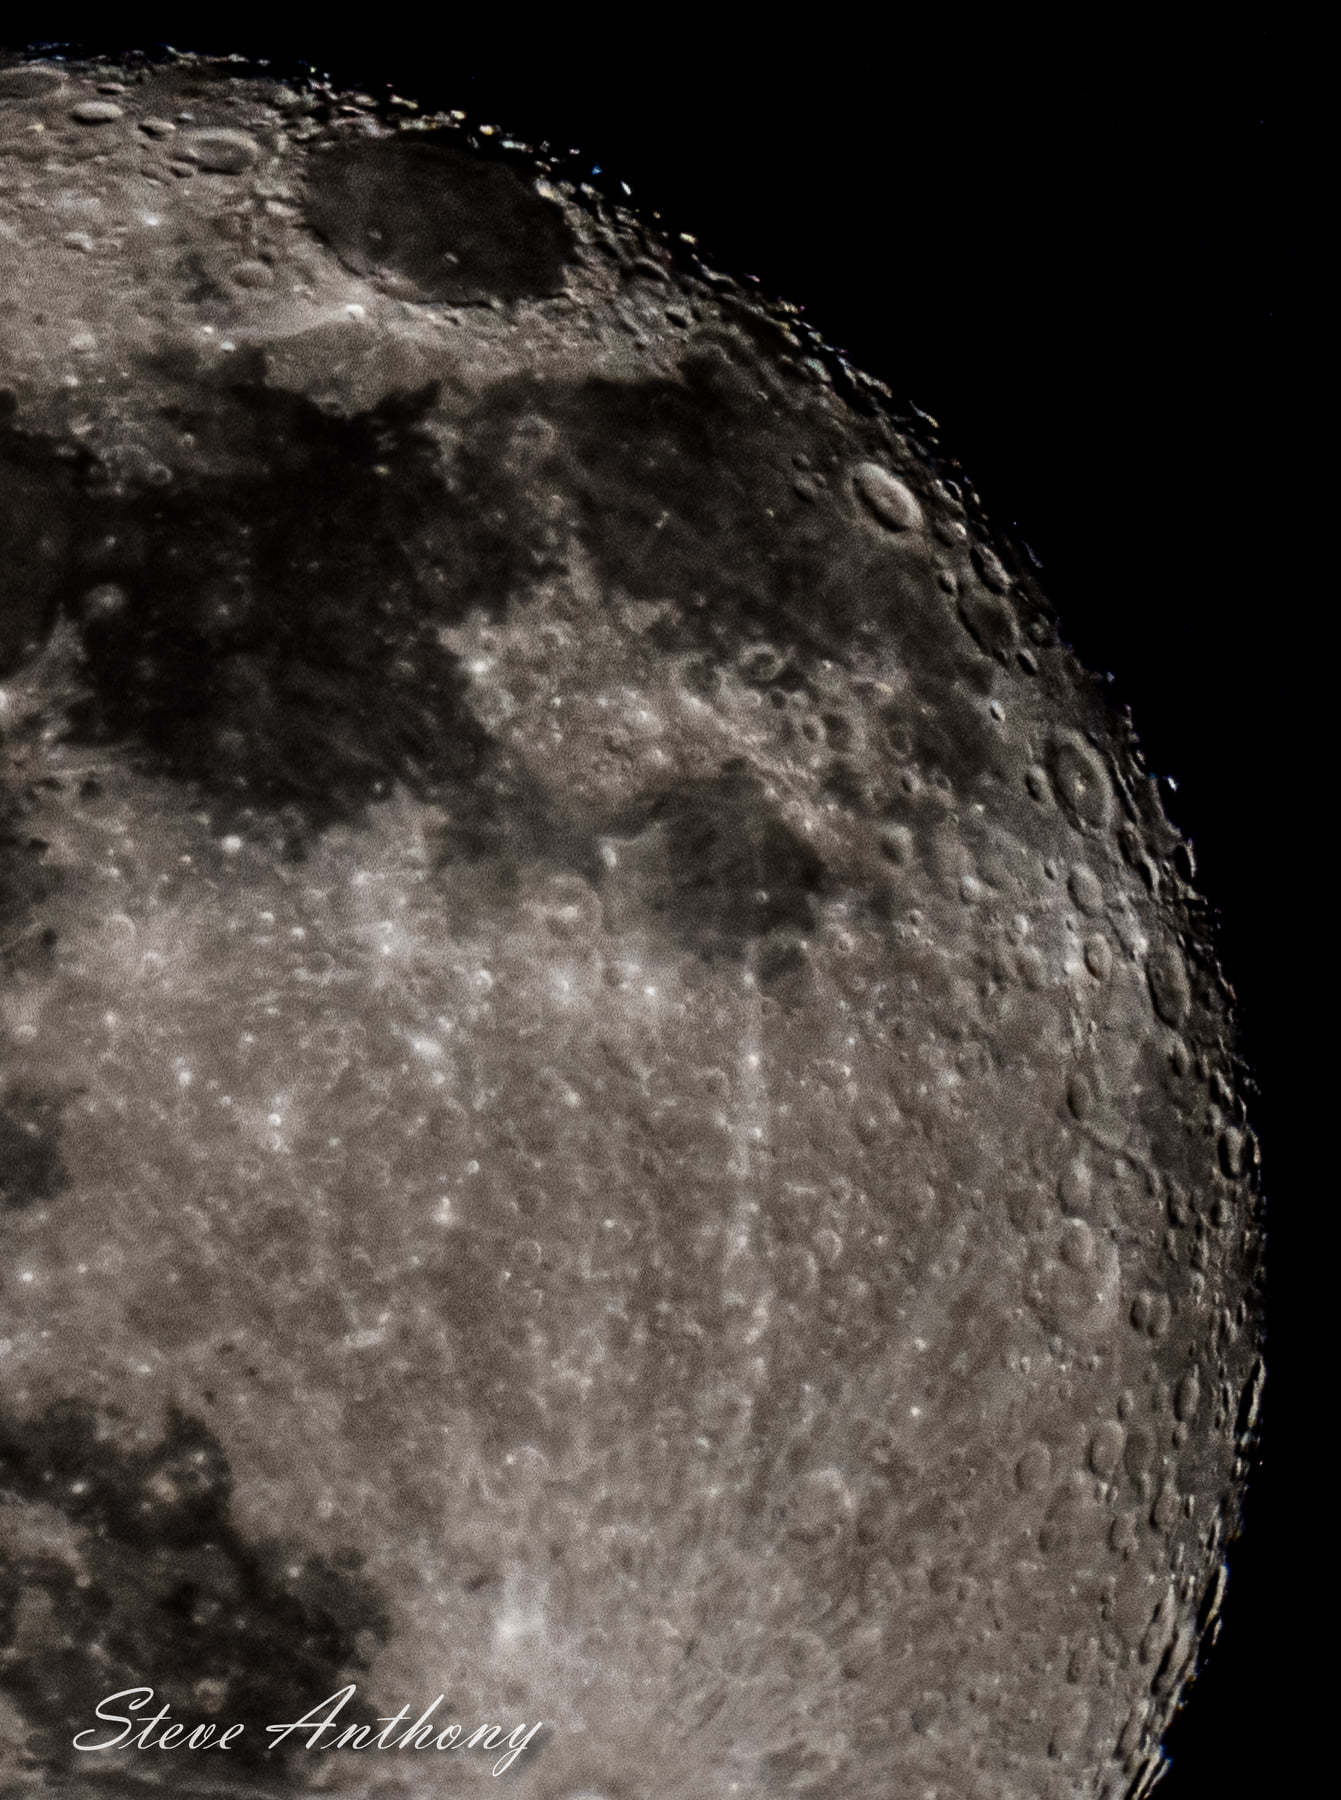 The moons craters are clearly visible in Steve Anthonys cropped image